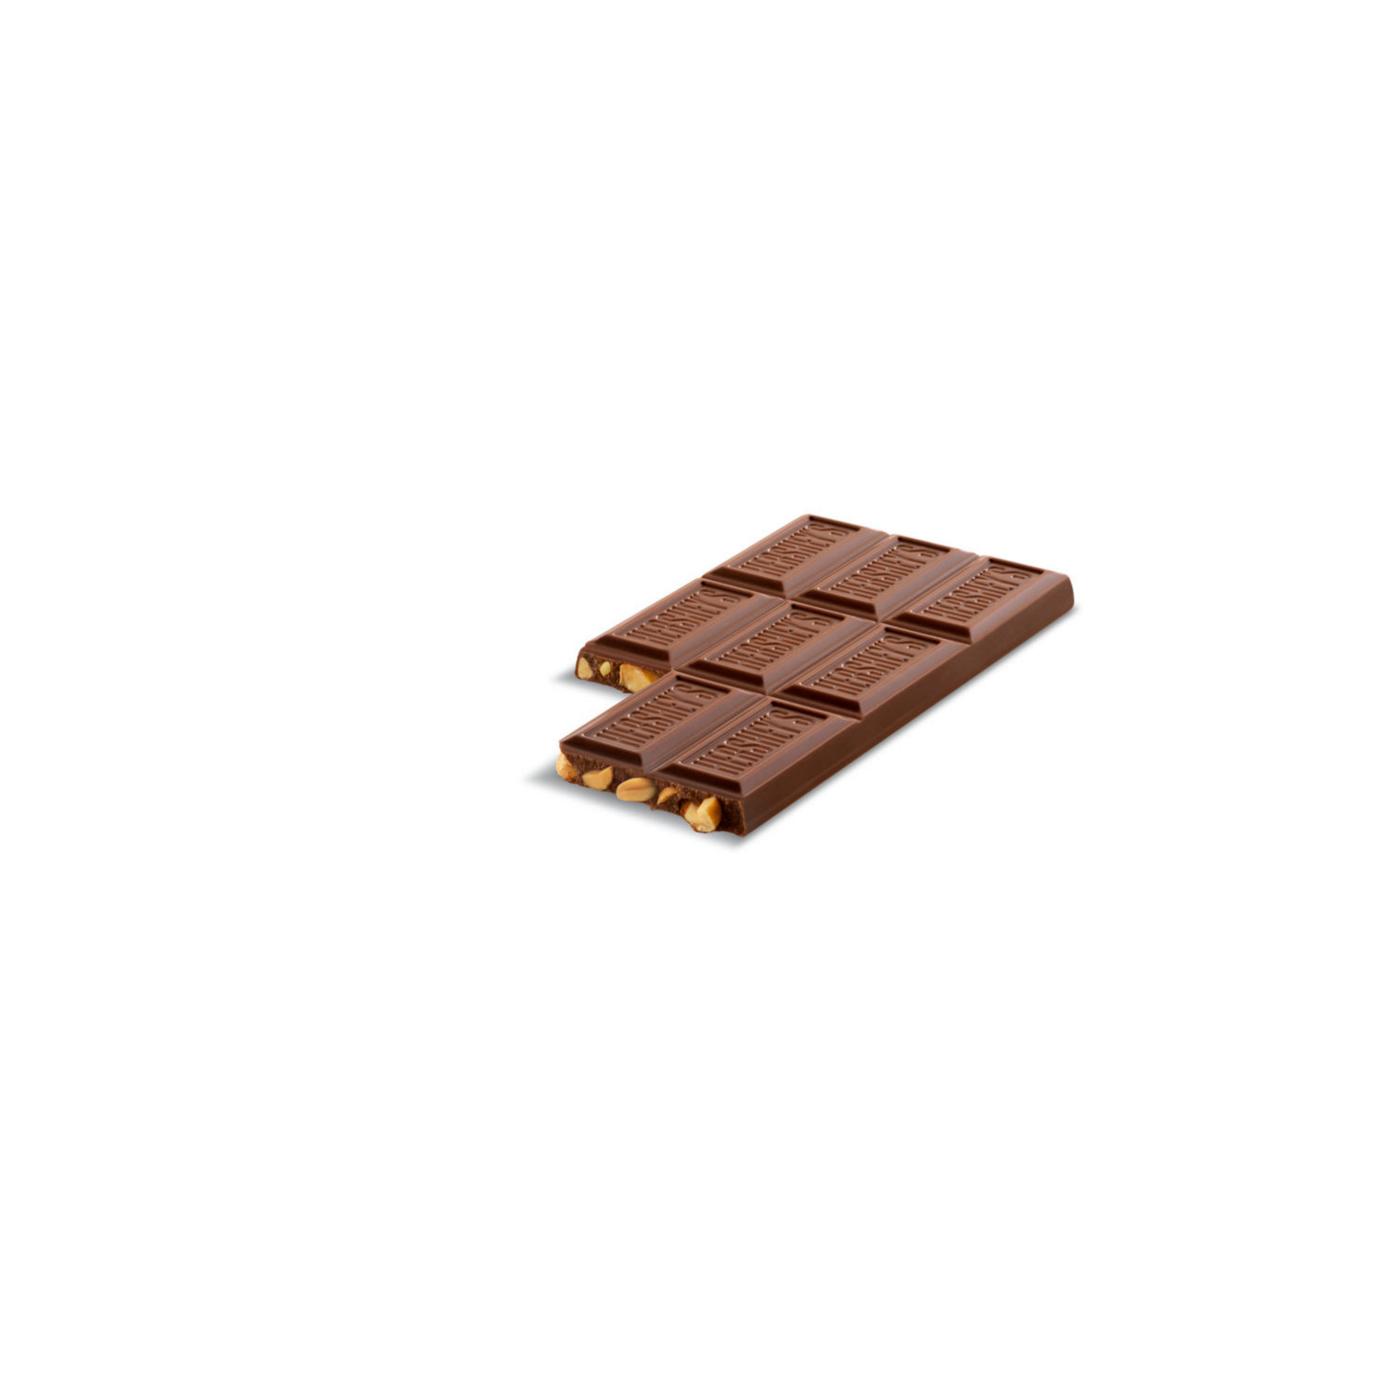 Hershey's Mr. Goodbar Chocolate with Peanuts Candy Bar; image 6 of 7